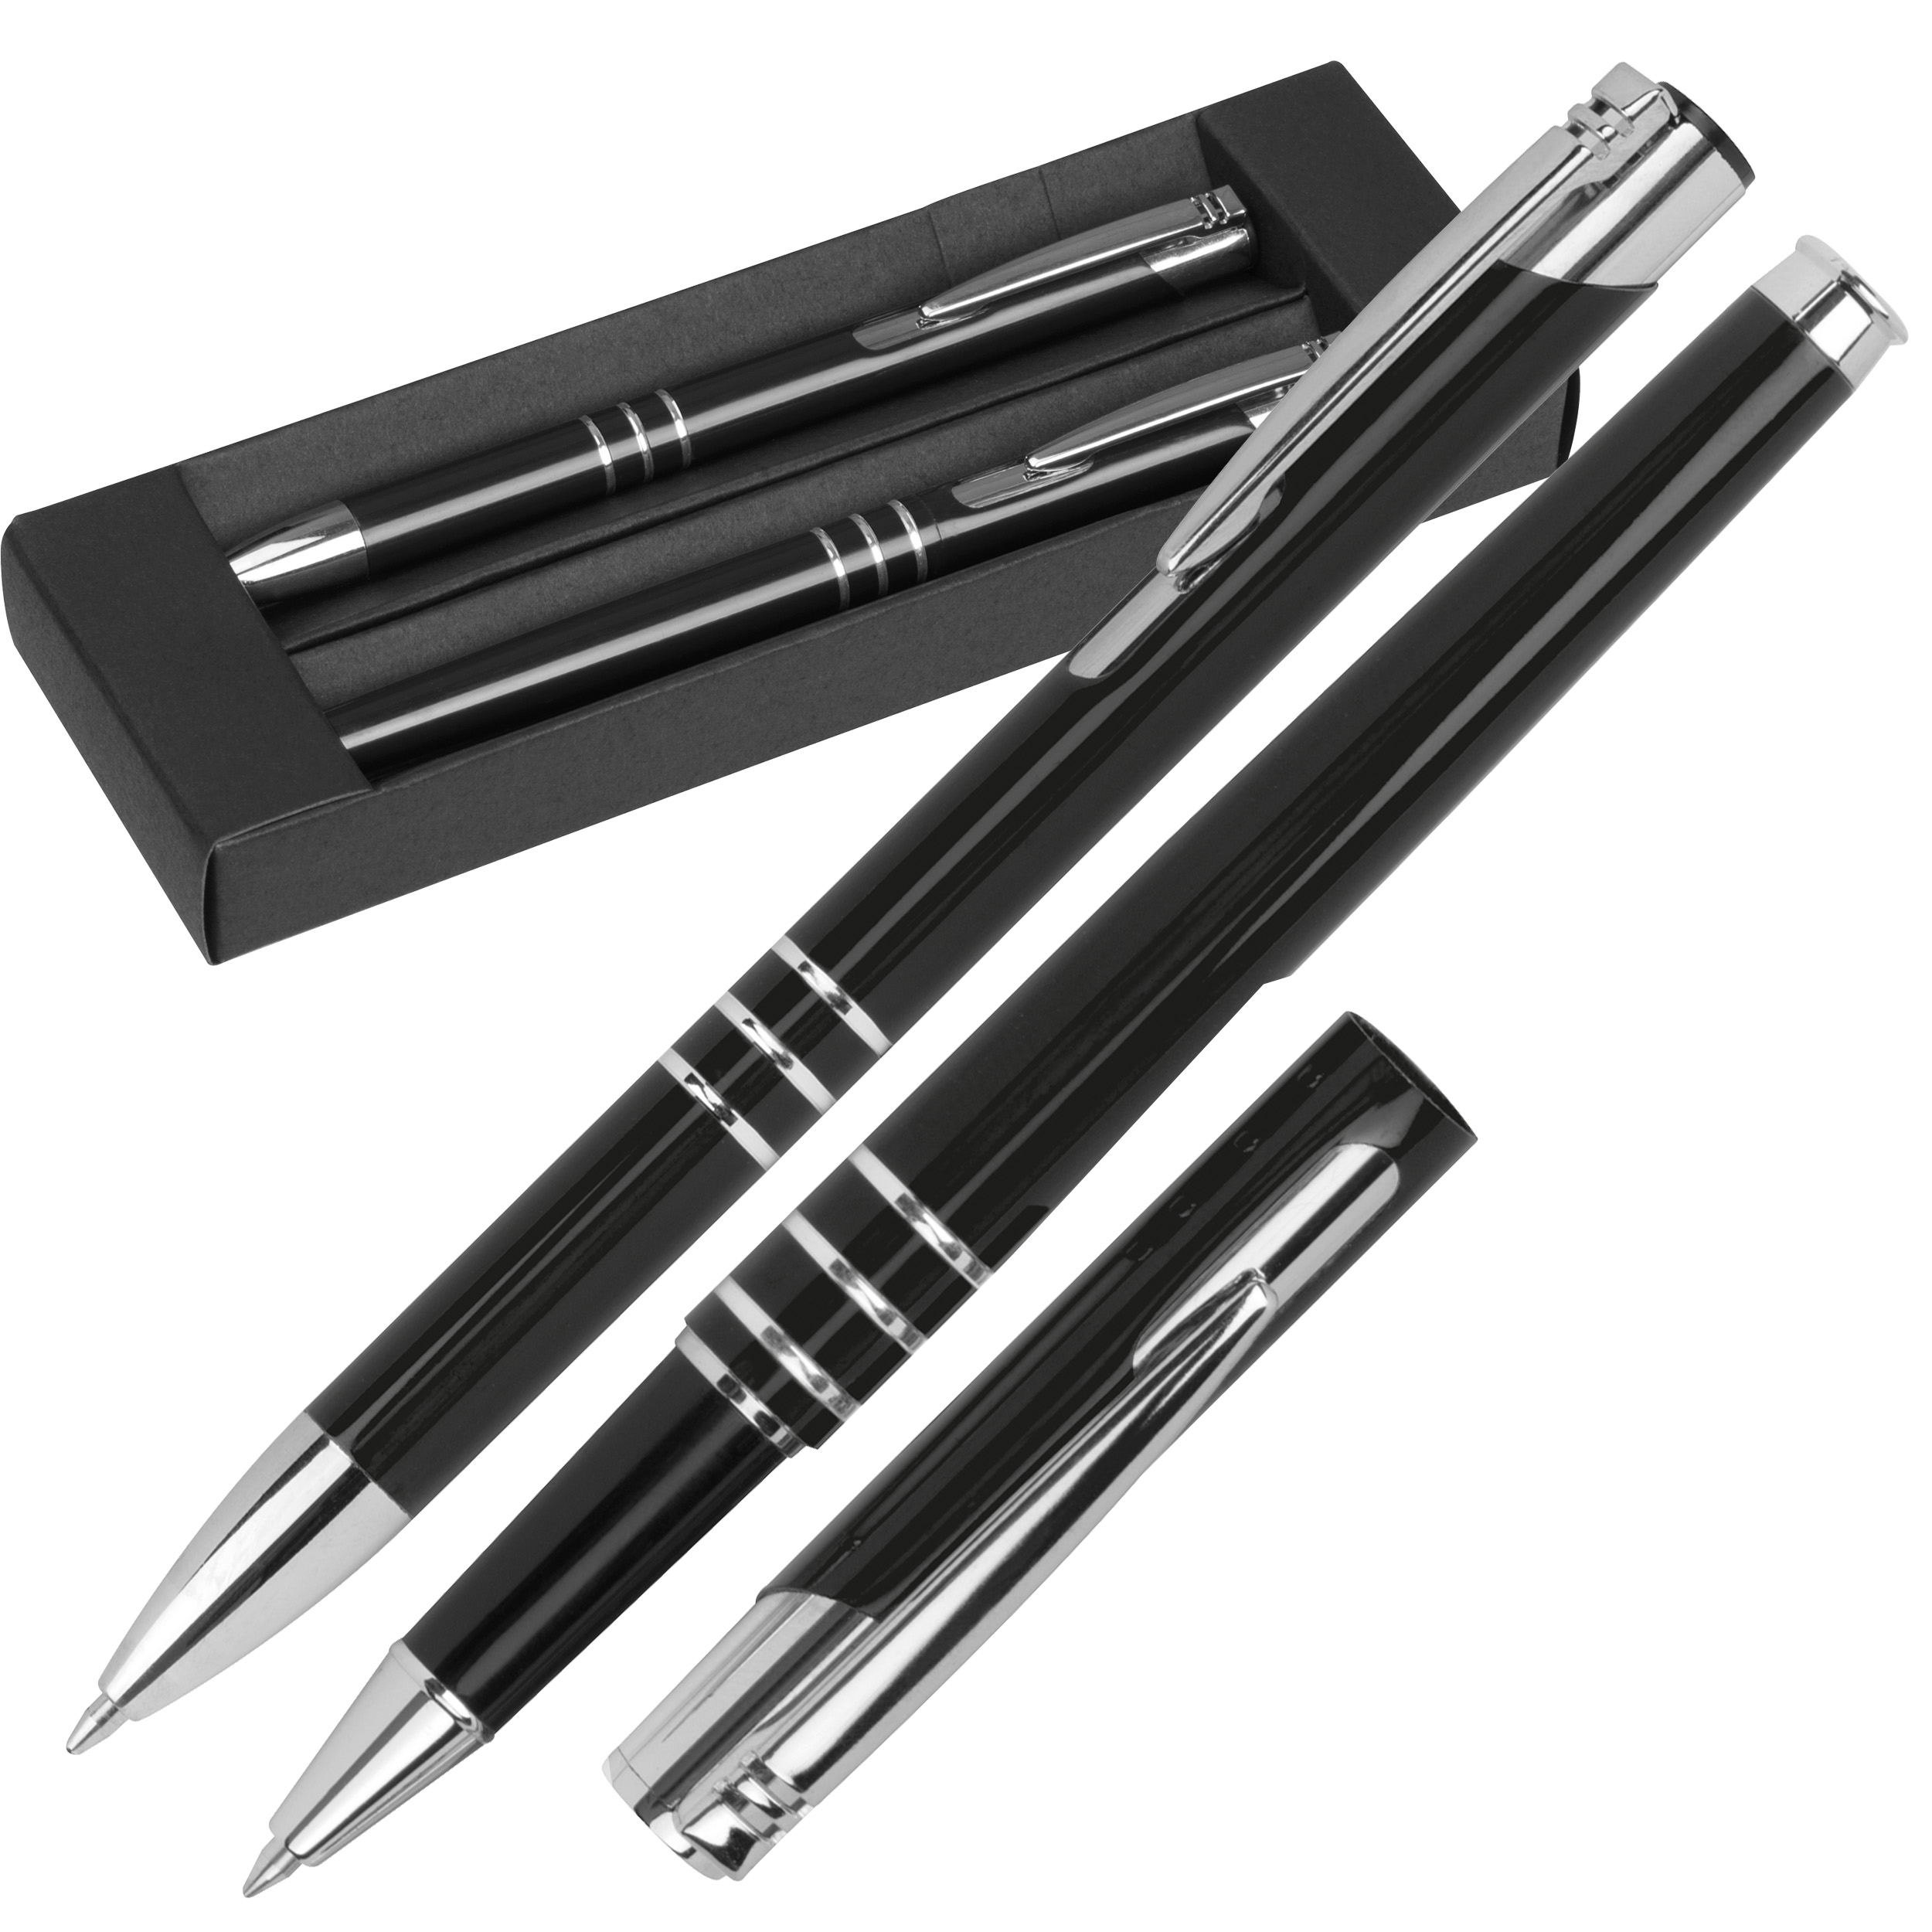 Writing set with ball pen and rollerball pen